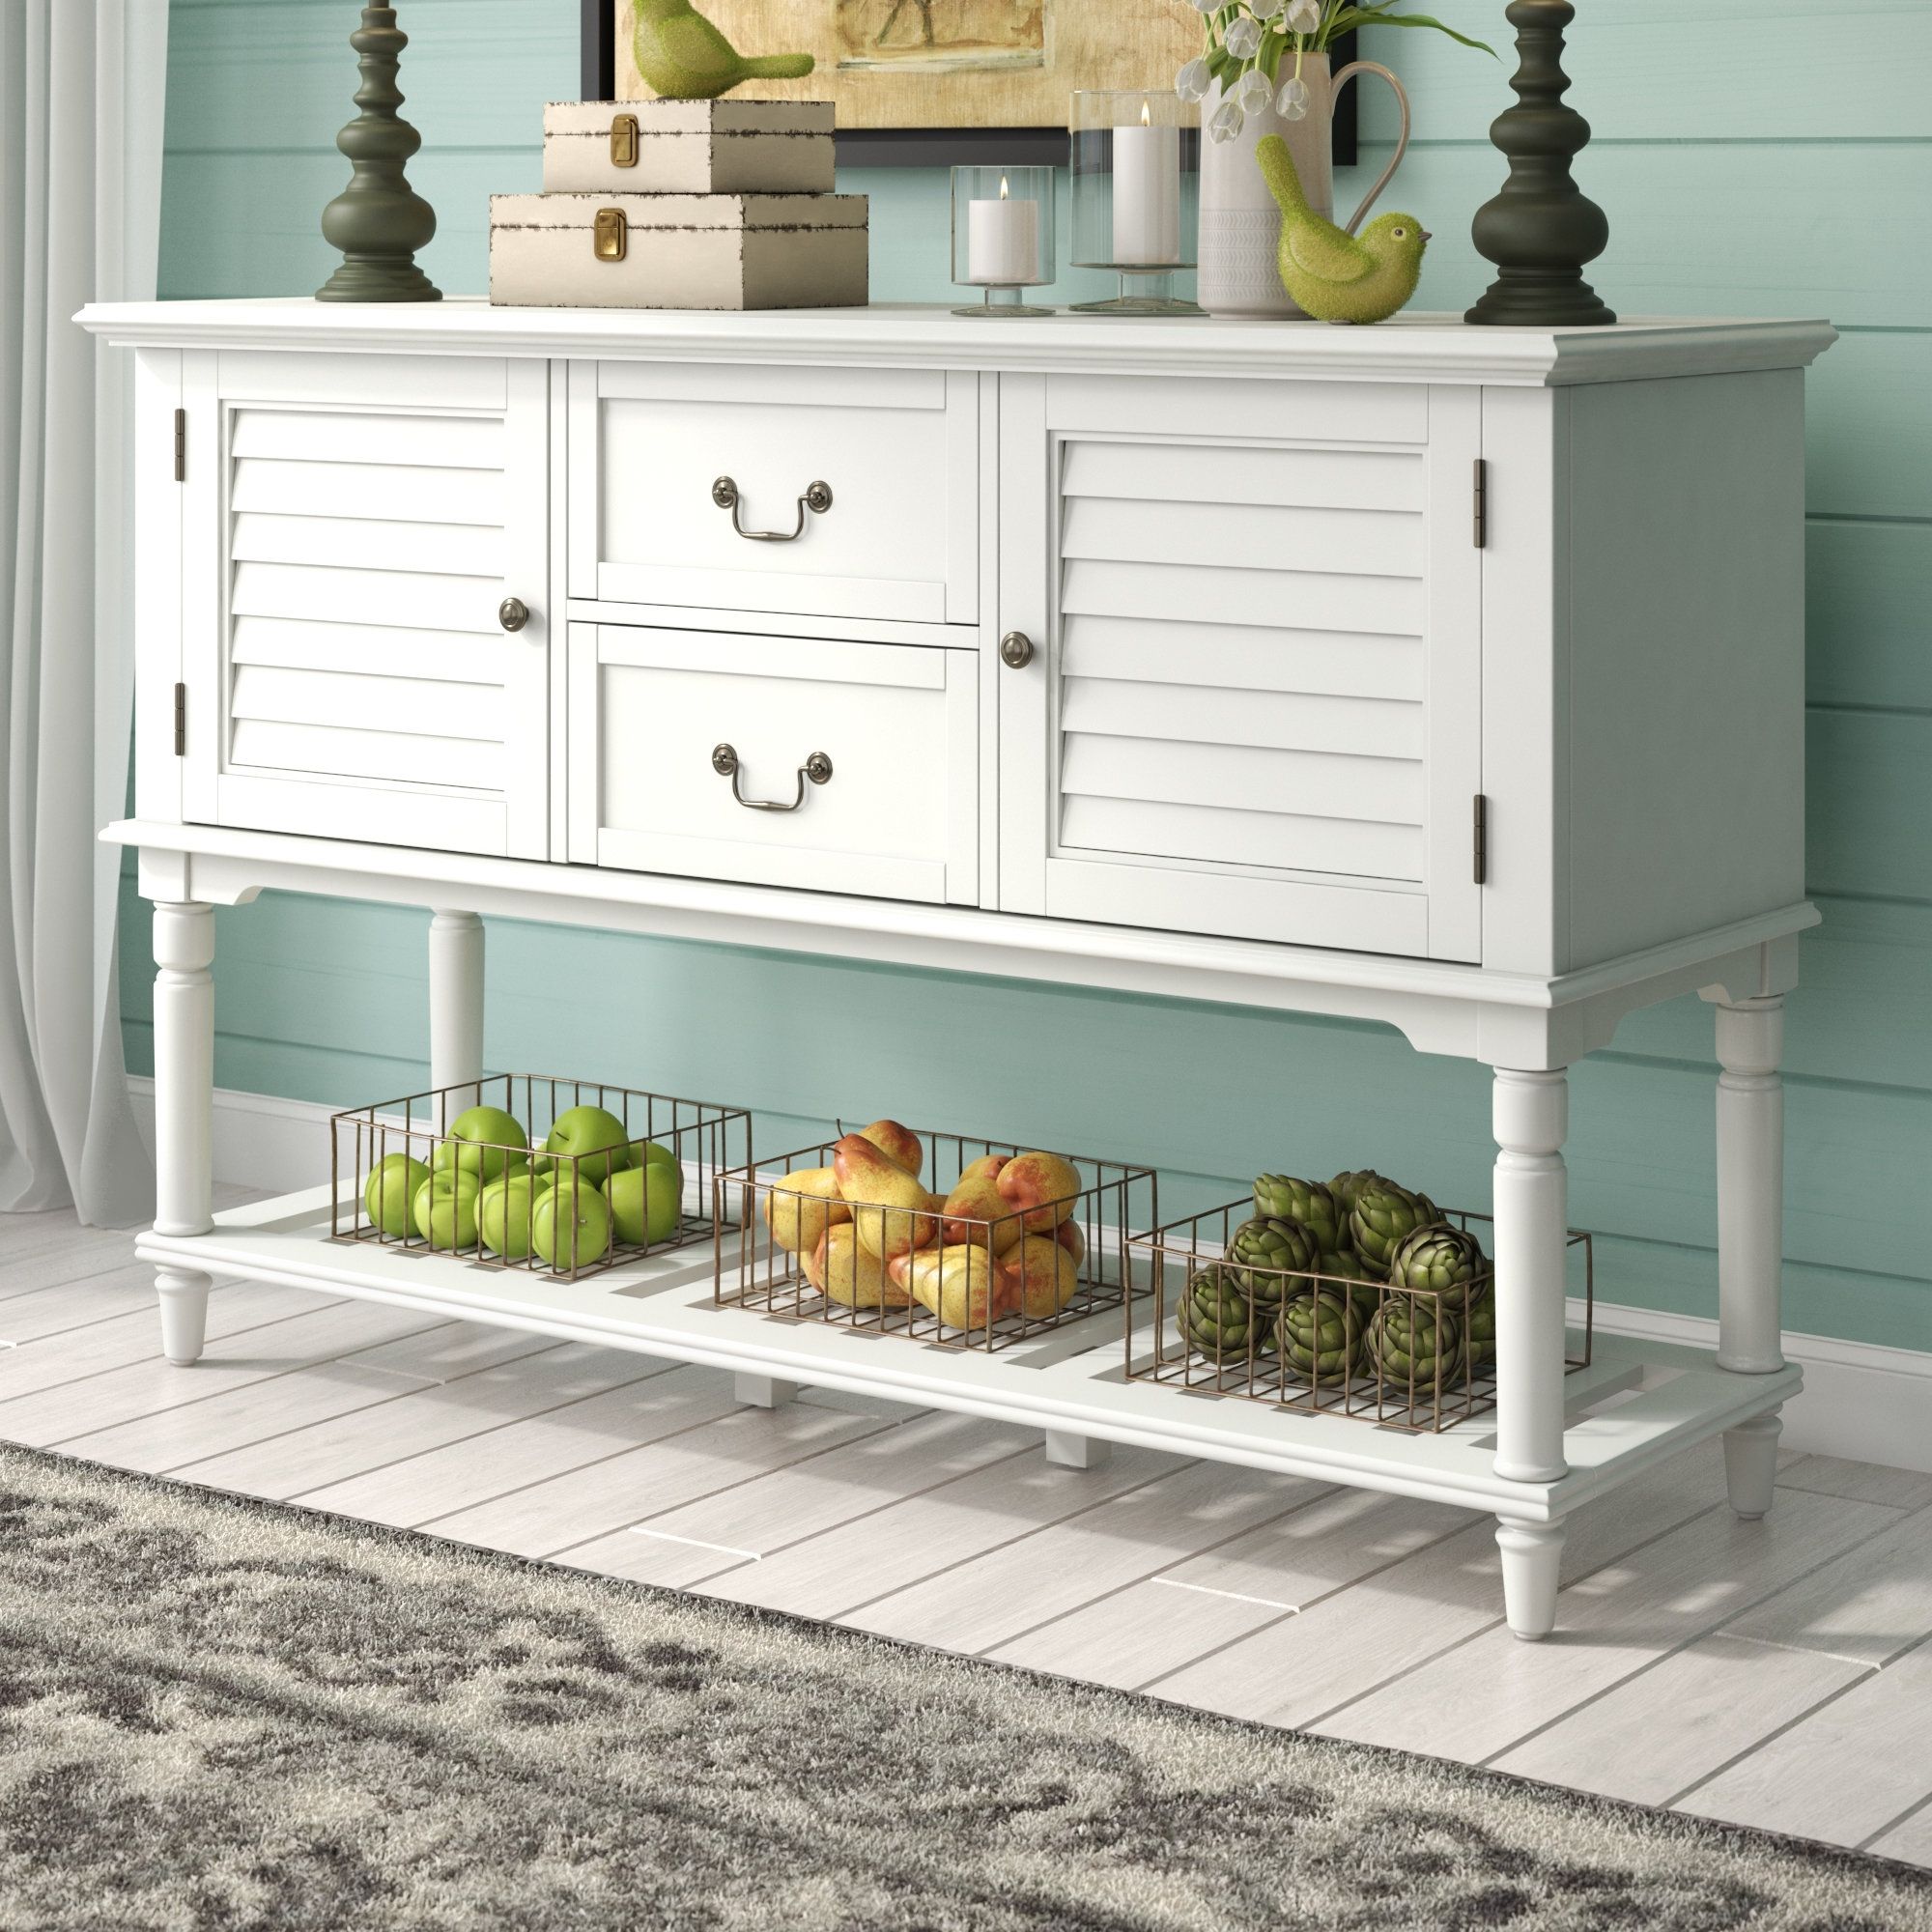 Ophelia & Co. Galilee Buffet Table & Reviews | Wayfair With Regard To Most Recently Released Solar Refinement Sideboards (Photo 16 of 20)